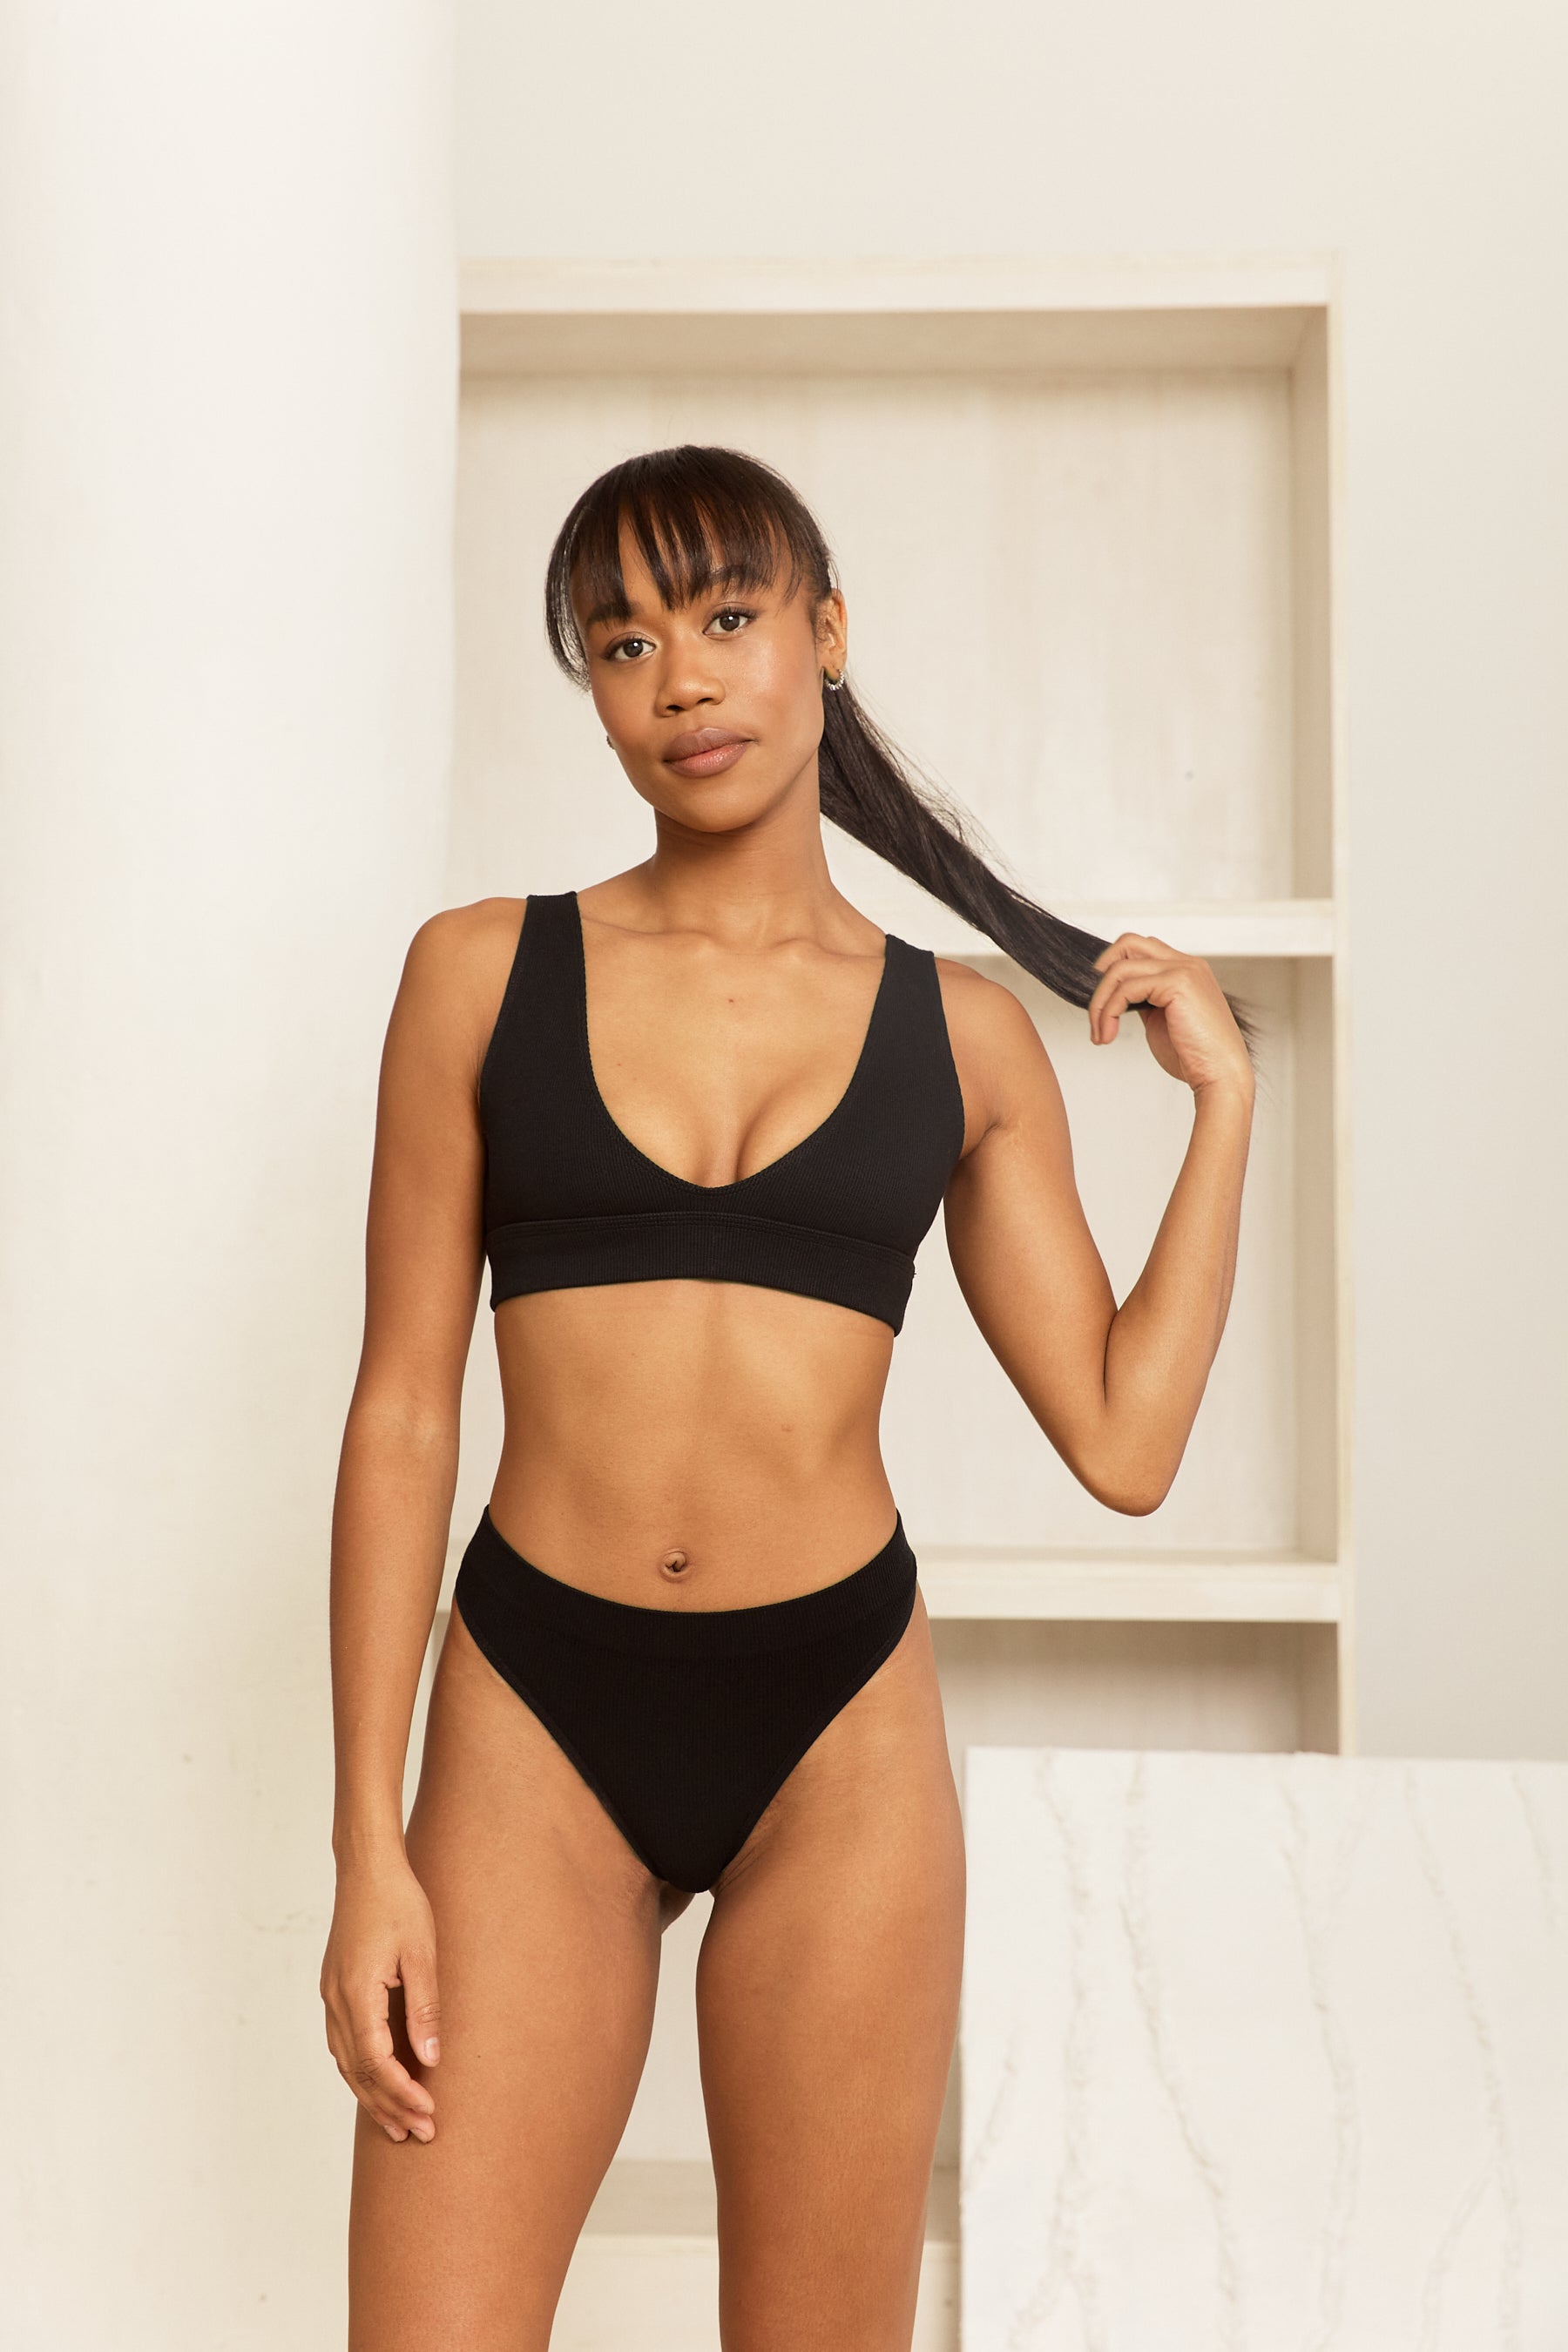 Check out tantalising and 'clever' underwear from M & S lingerie collection